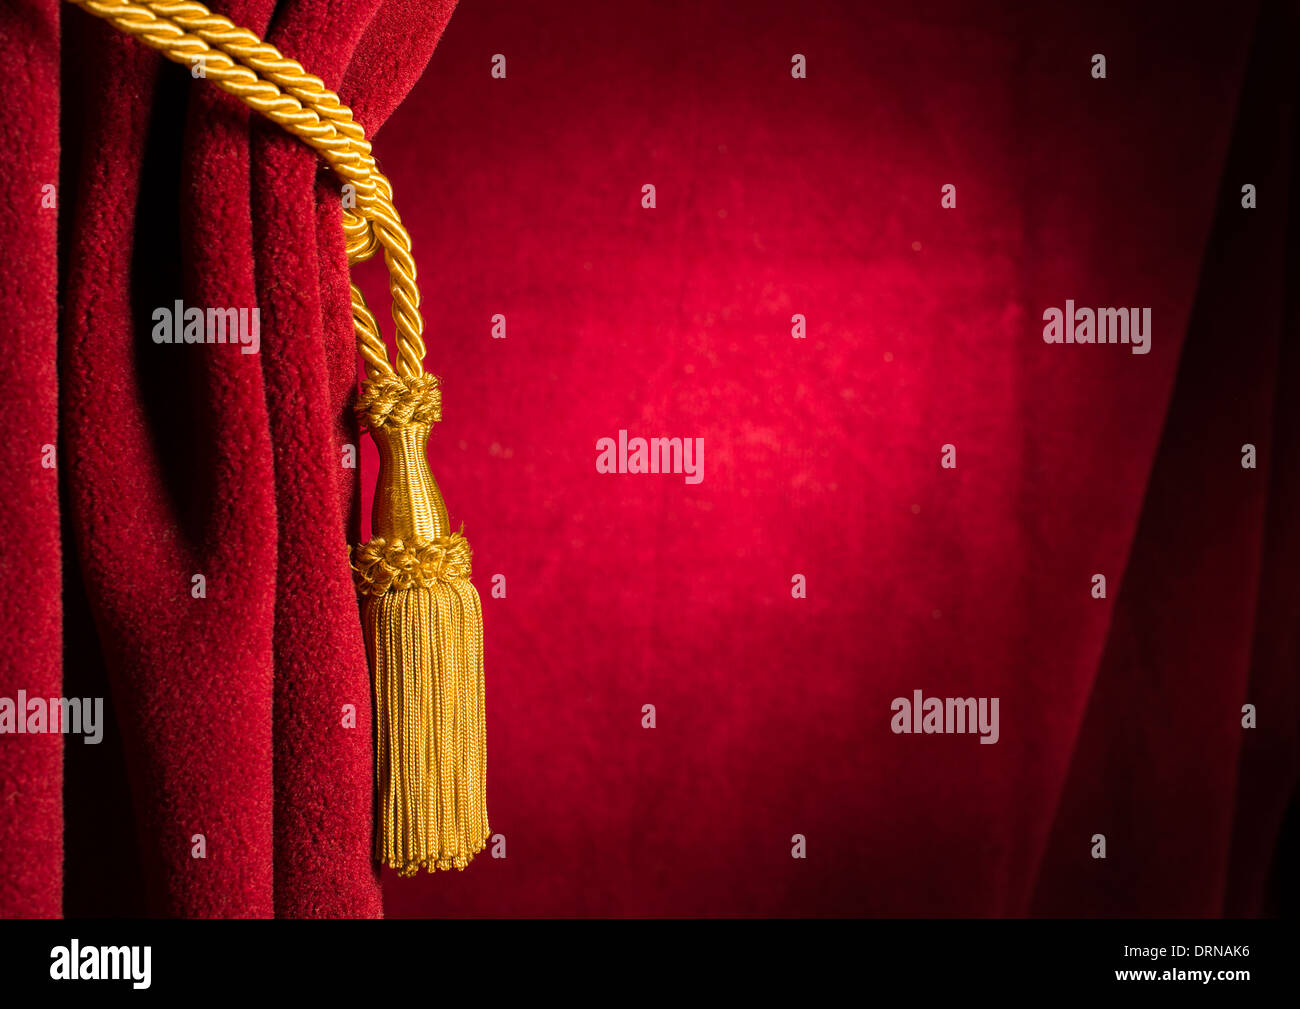 Red theatre curtain and yellow tassels Stock Photo